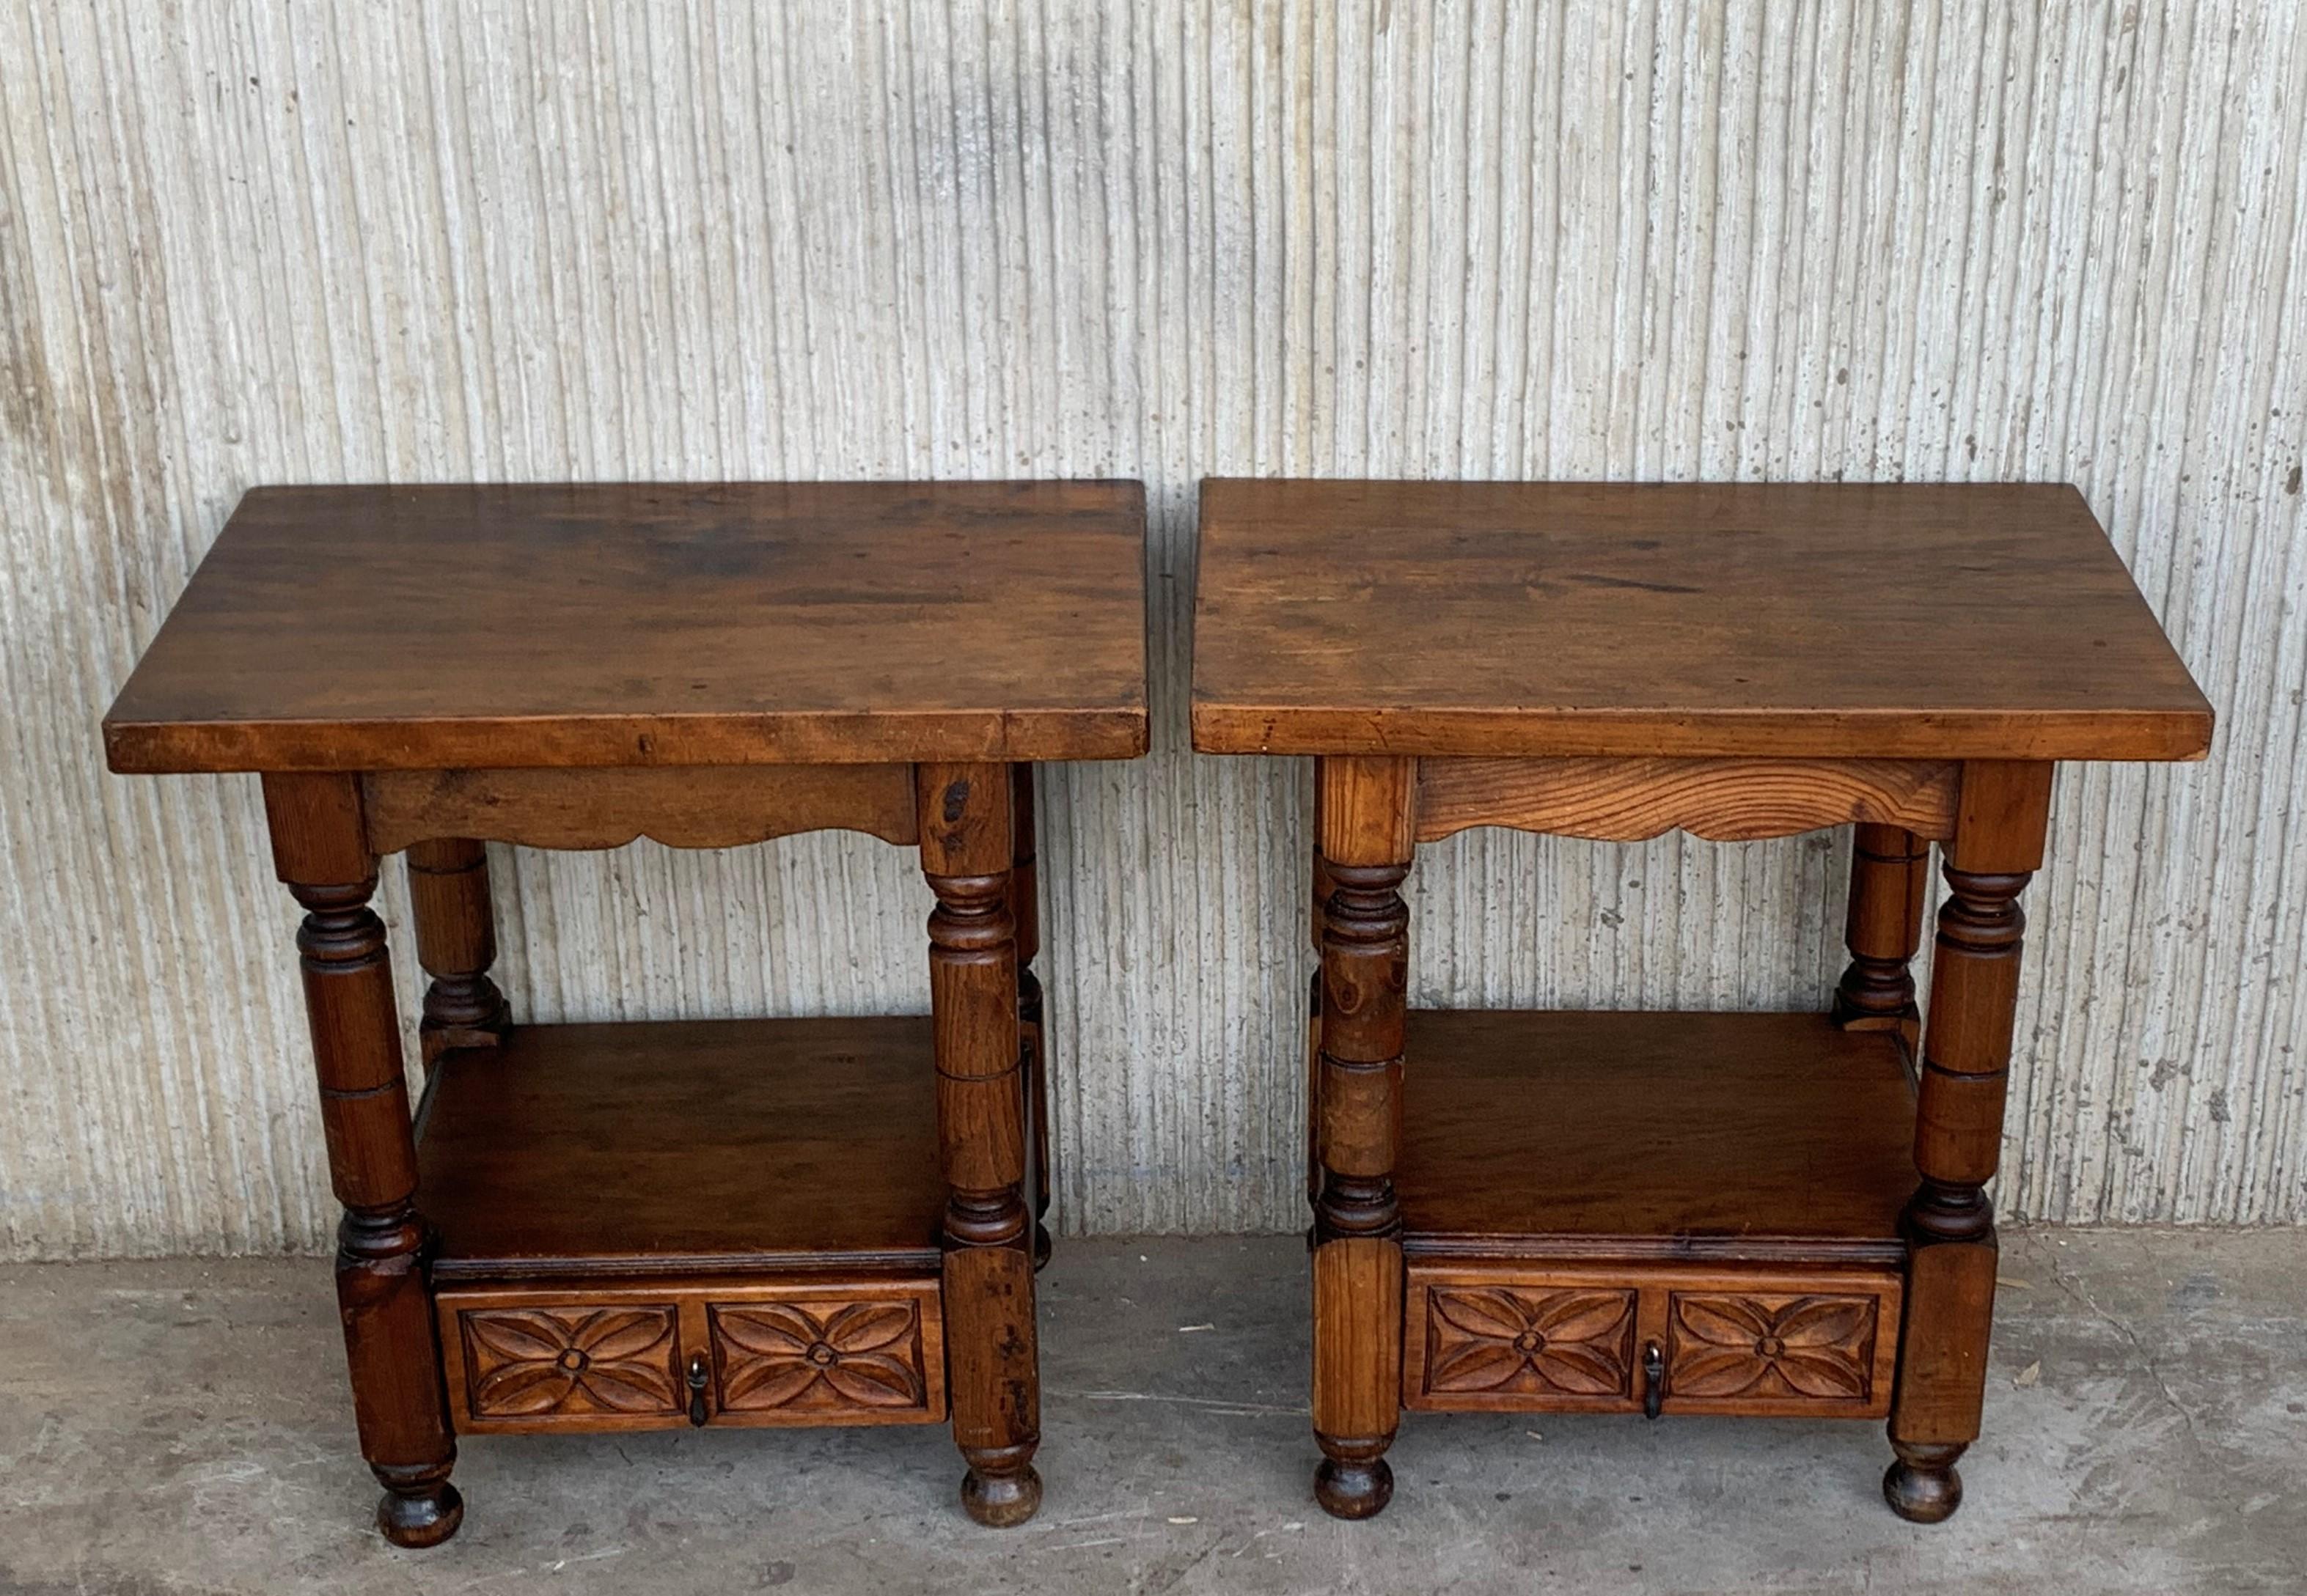 20th century pair of Catalan - Spanish nightstands with carved drawer and open shelf
Beautiful solomonic colums of this period
Beautiful and heavy nightstands with carved drawer.

Measure: Height to the middle shelve 3.54in.
    